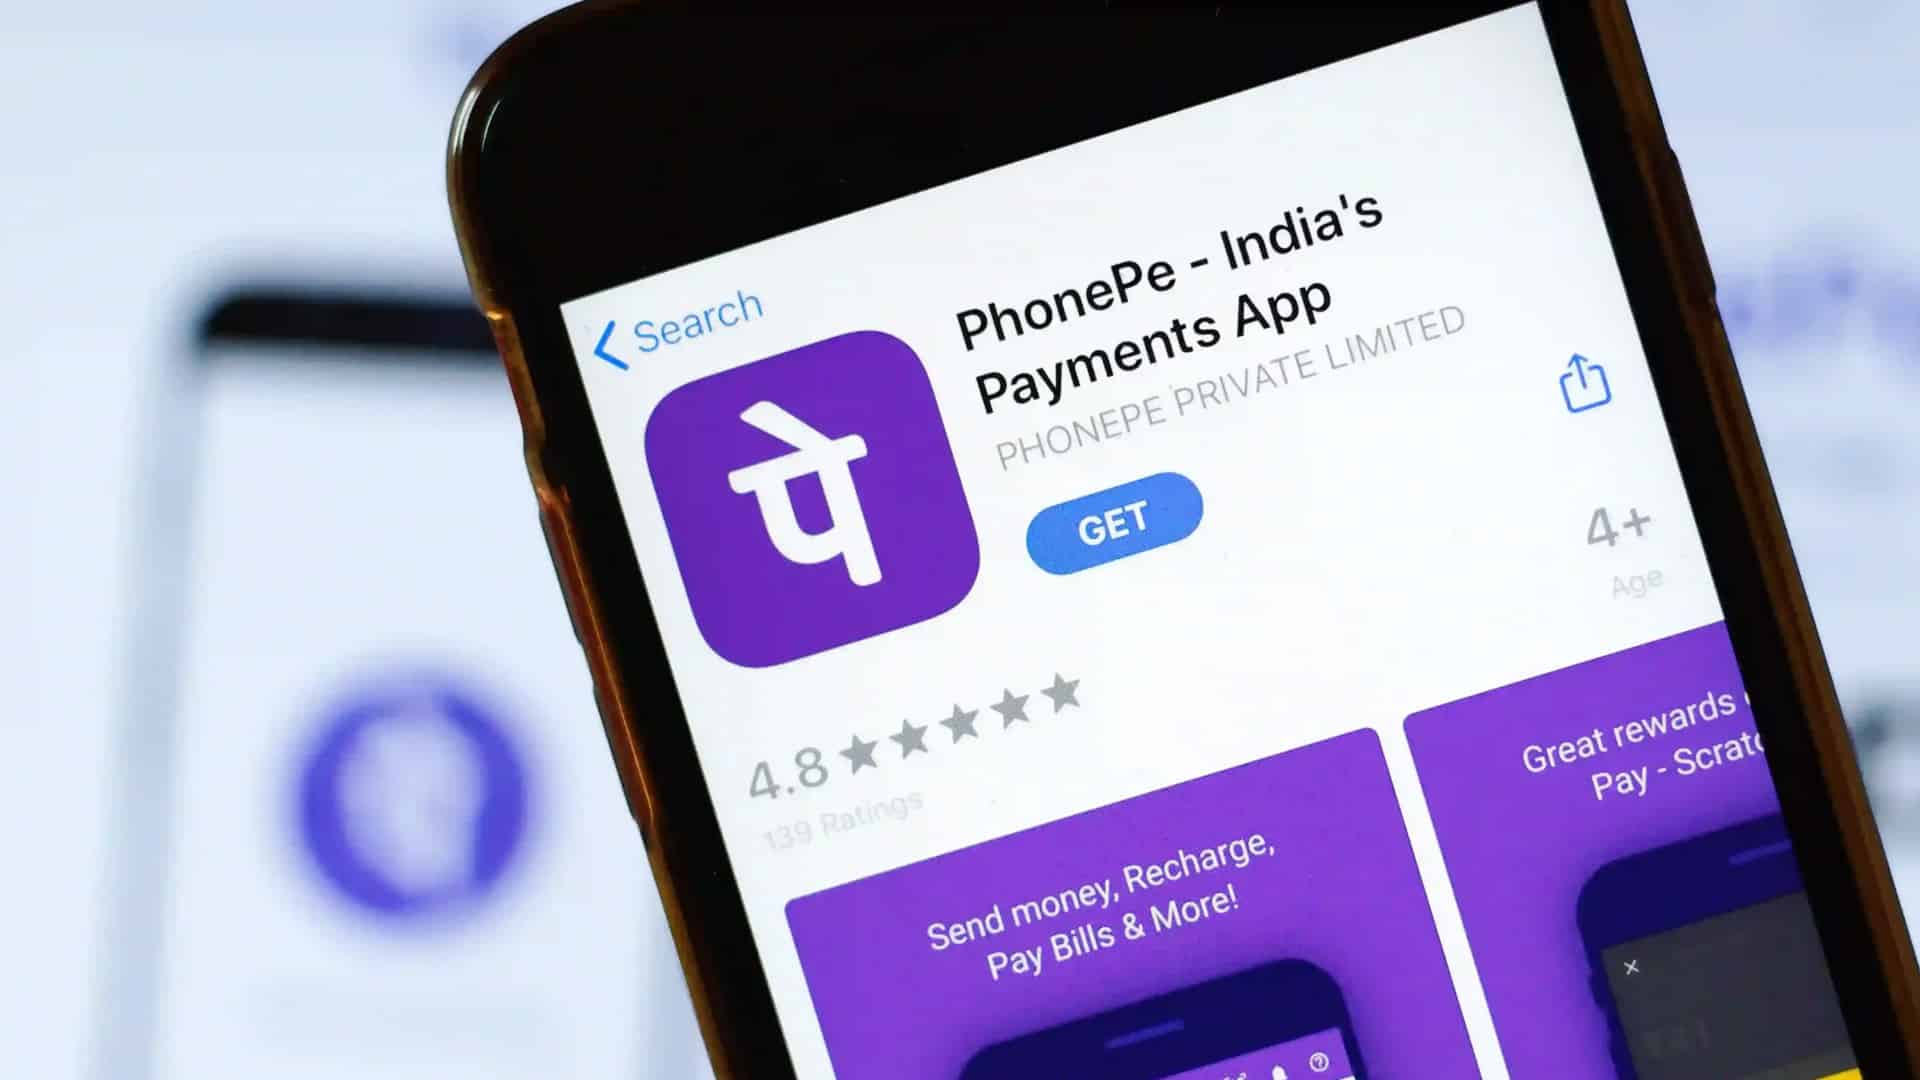 PhonePe reaches USD 1 trillion annualised payment value run rate; gets payment aggregator licence